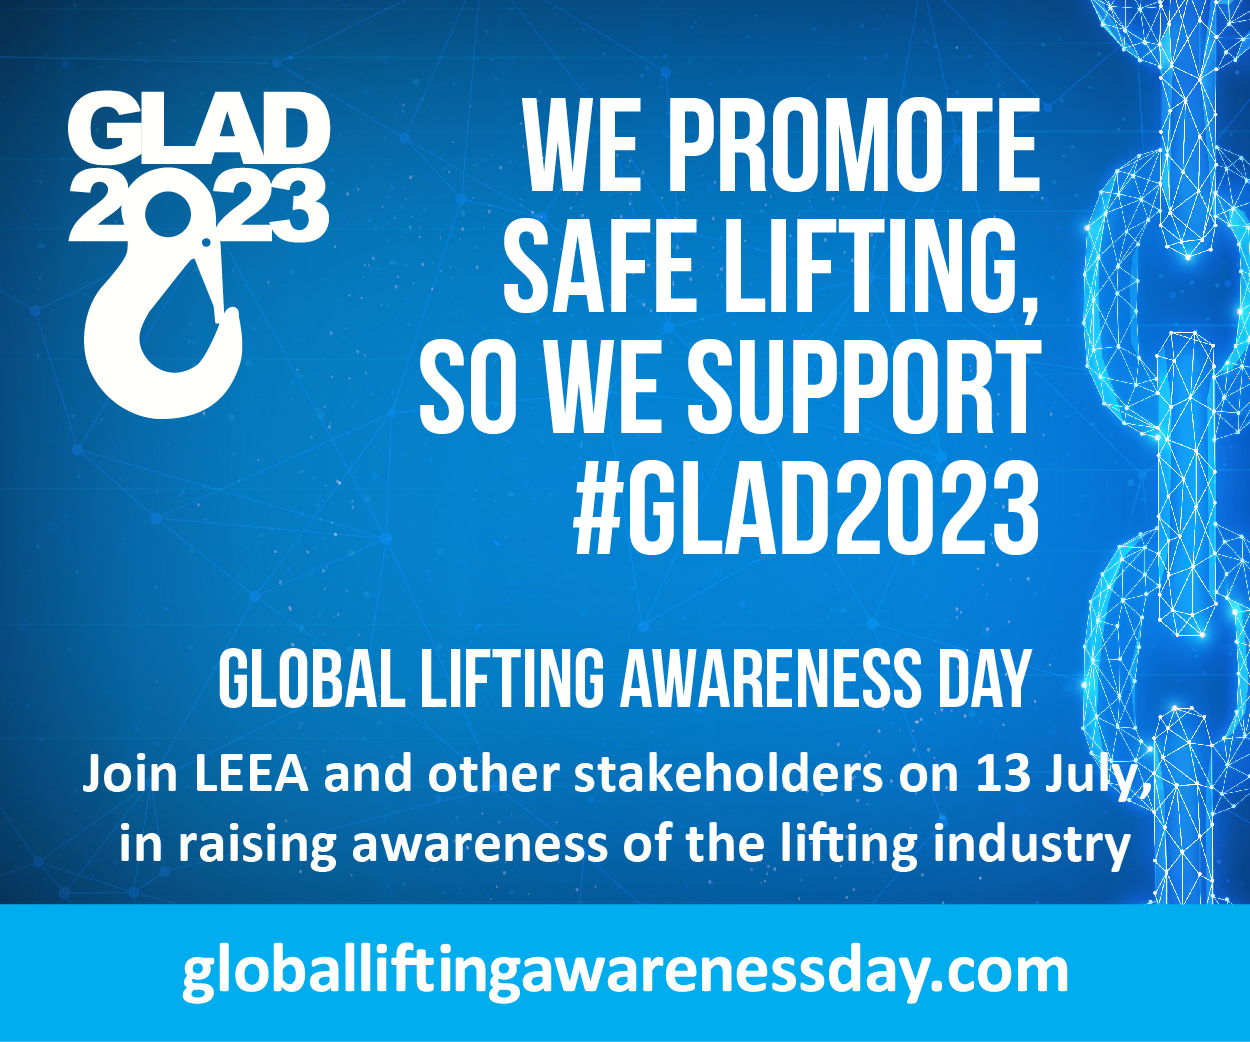 'We promote safe lifting, se we support GLAD' had previously emerged as the rallying call of this year's Global Lifting Awareness Day - #GLAD2023 - on 13 July.